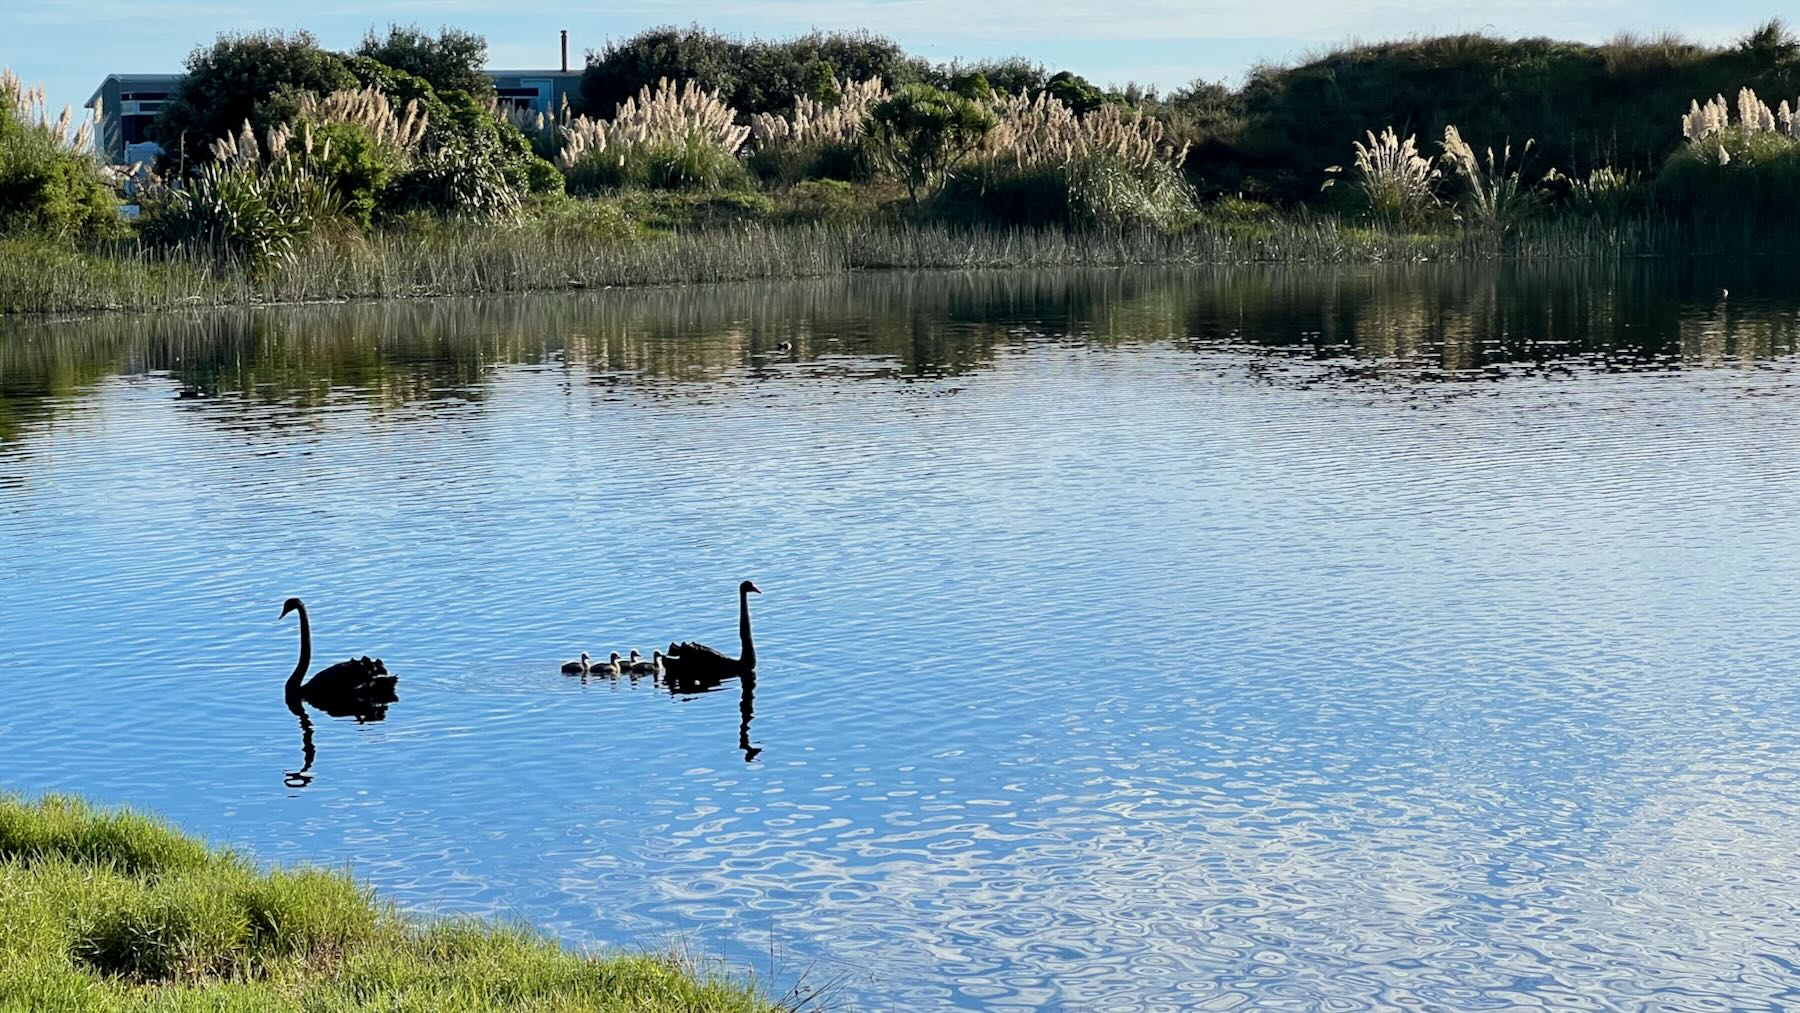 Two black swans on a small lake, with 4 grey cygnets. 